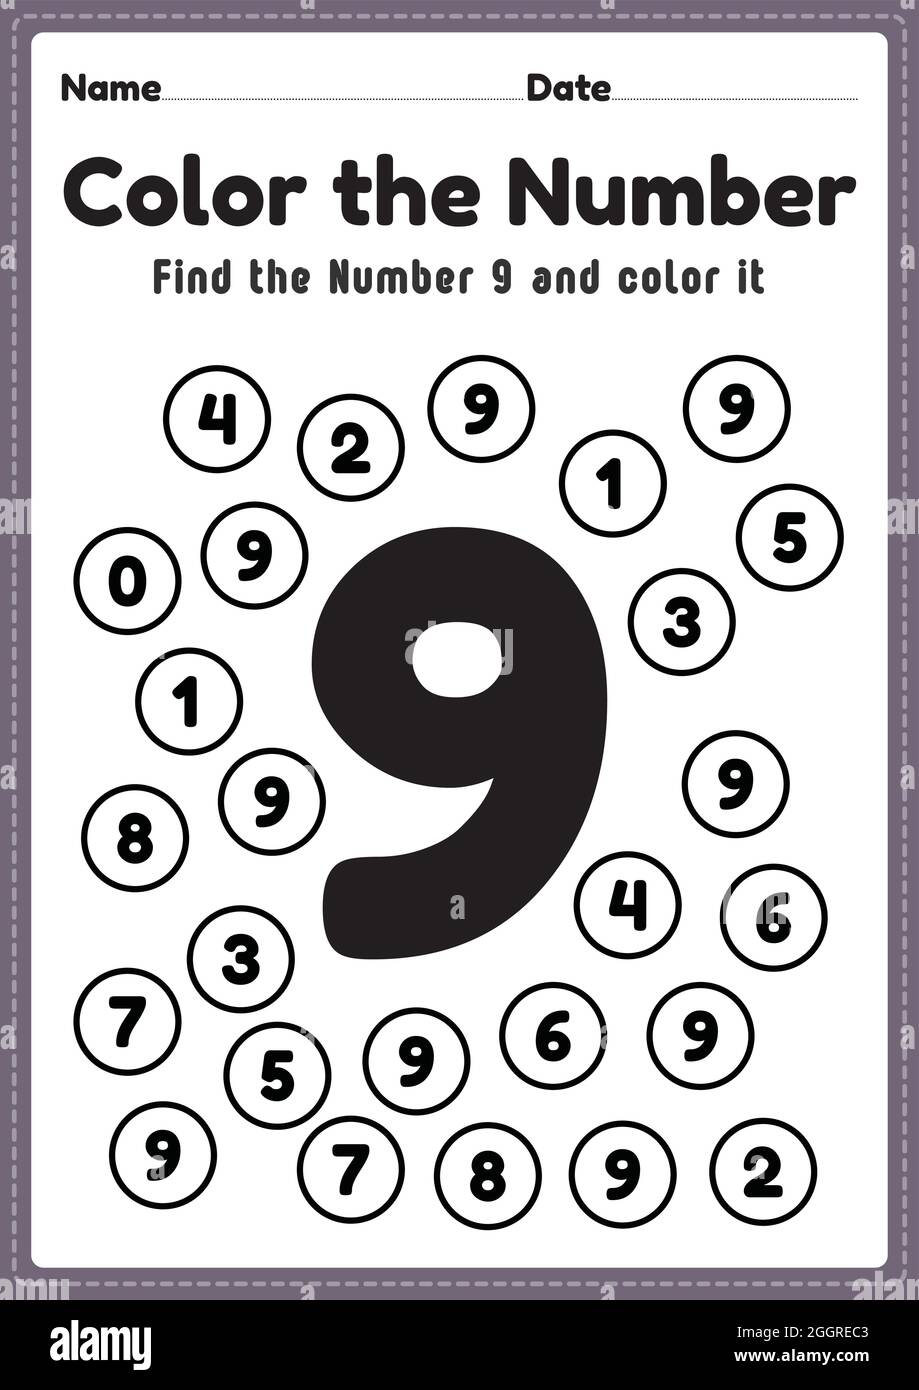 number-worksheets-for-preschool-number-9-coloring-math-activities-for